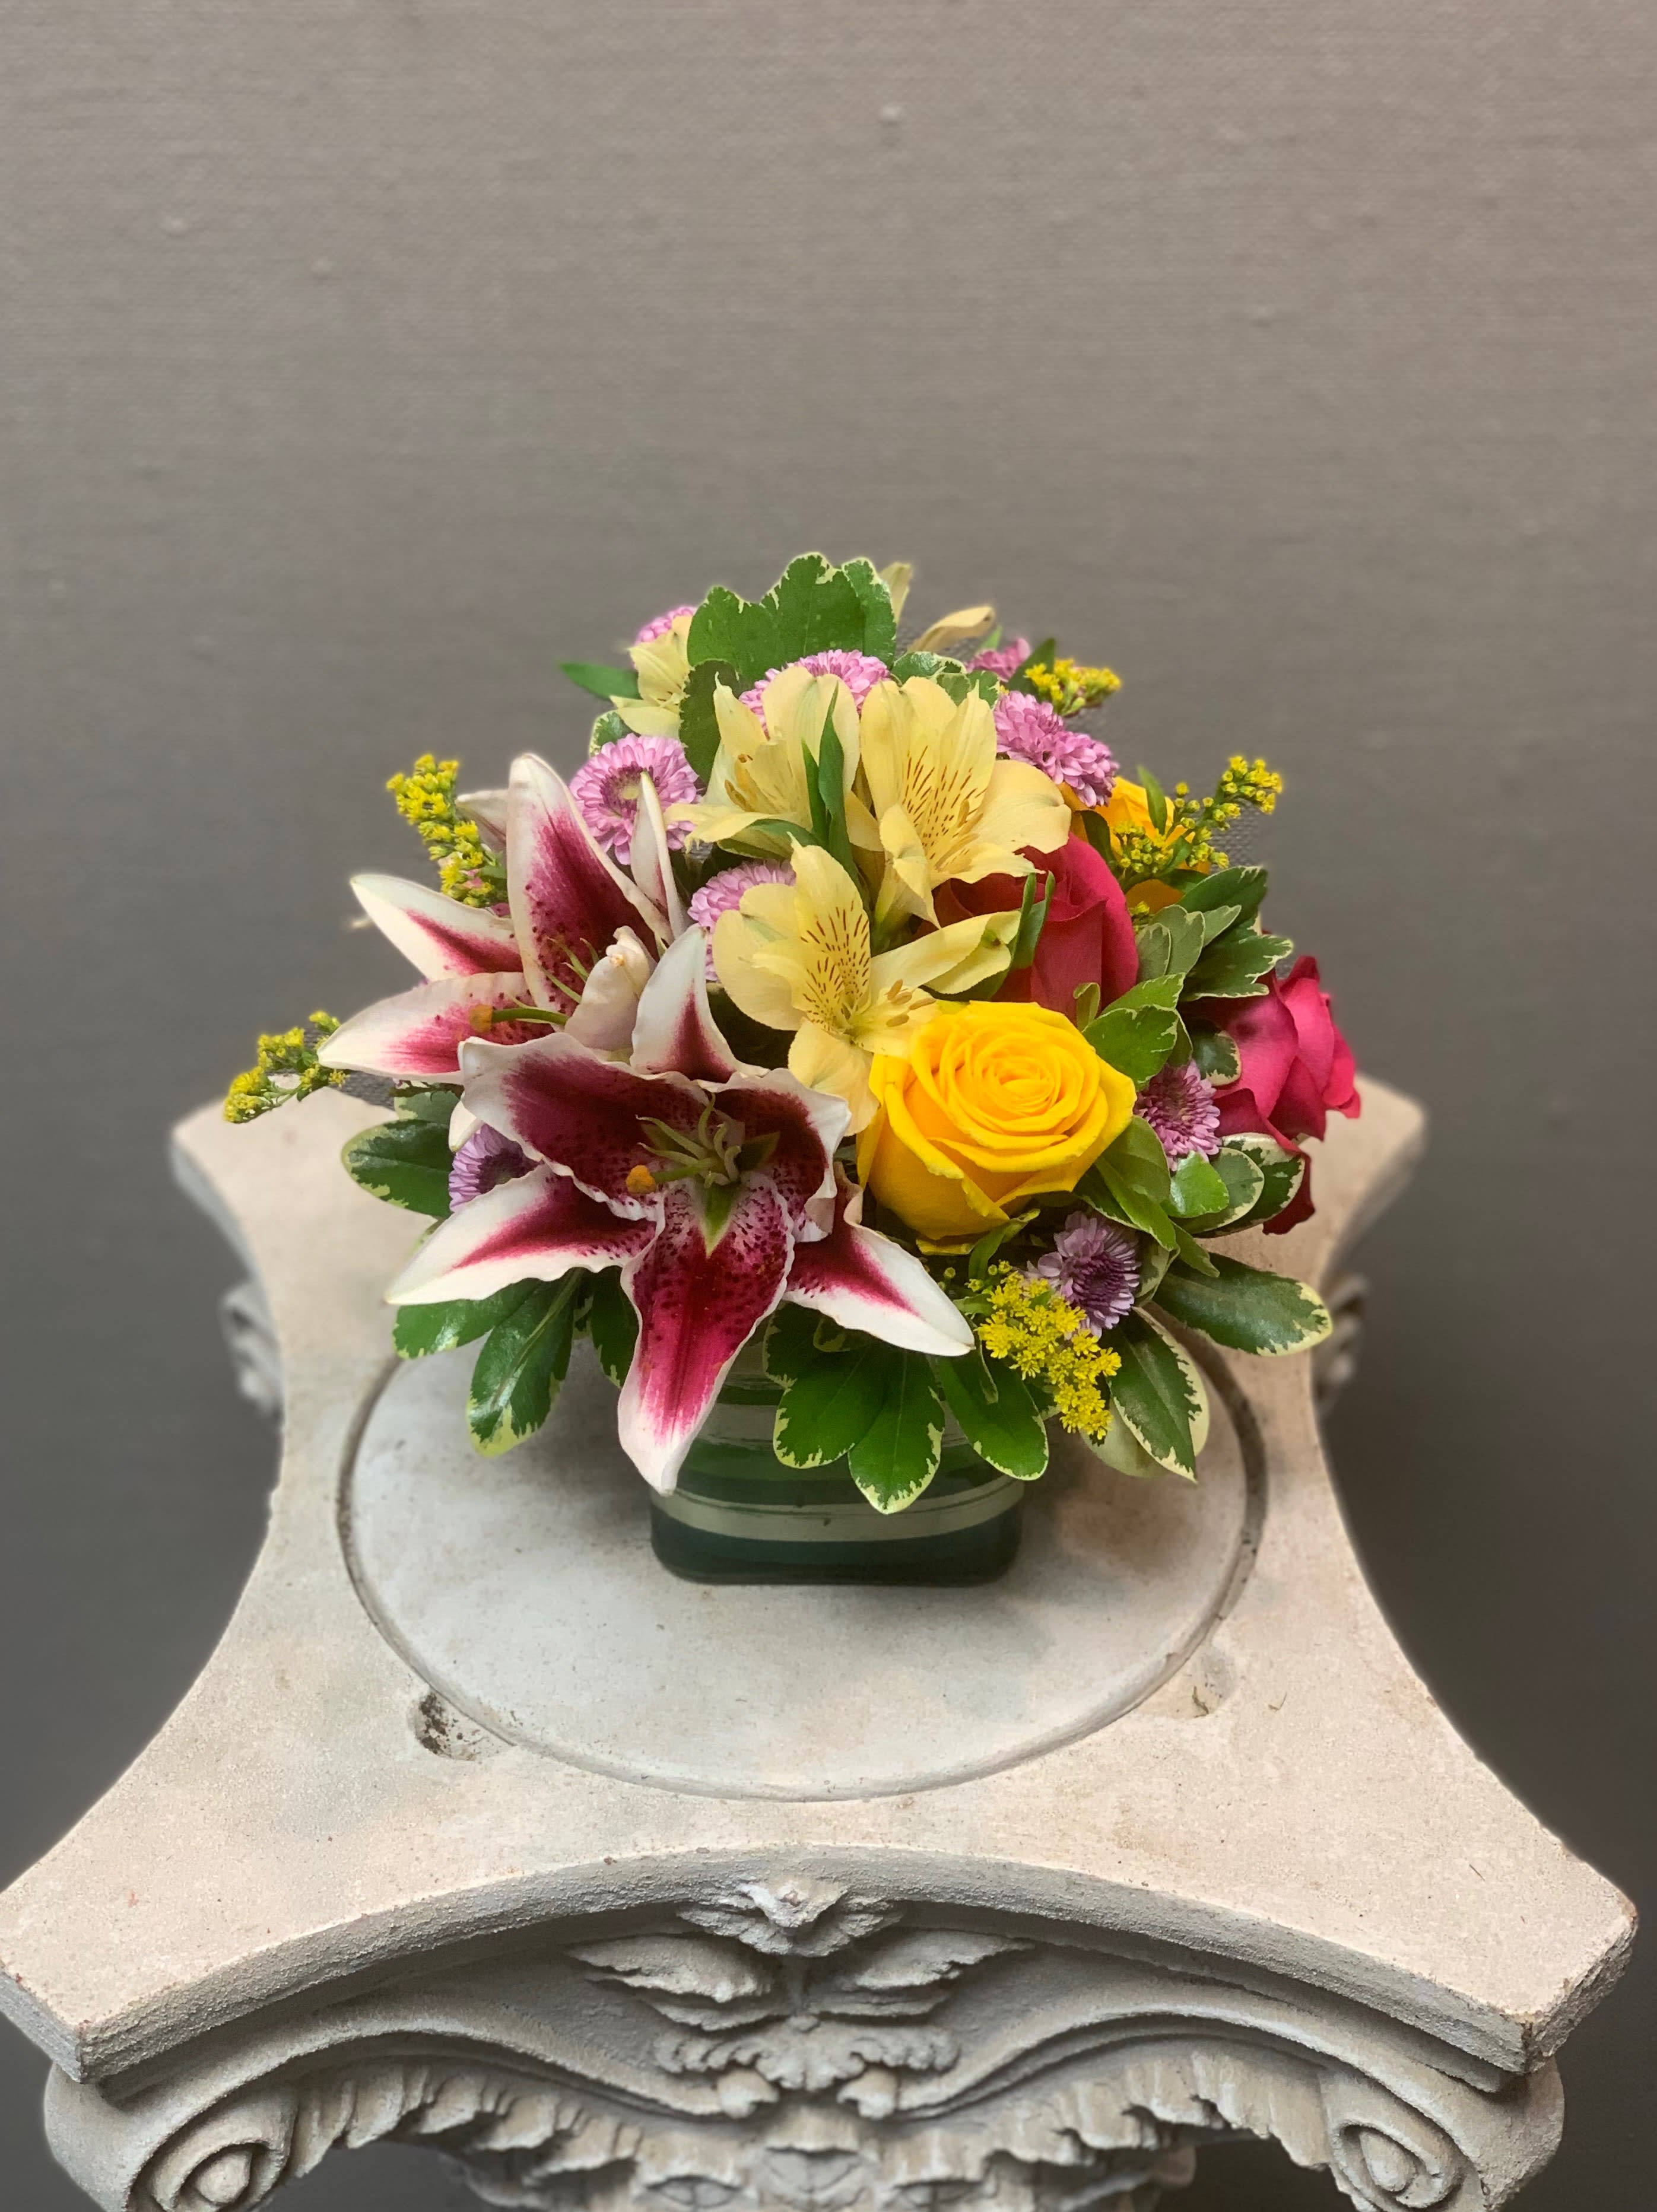 Say it Best! - This bouquet is a unique combo arranged in a glass cube that will help you celebrate your occasion best!